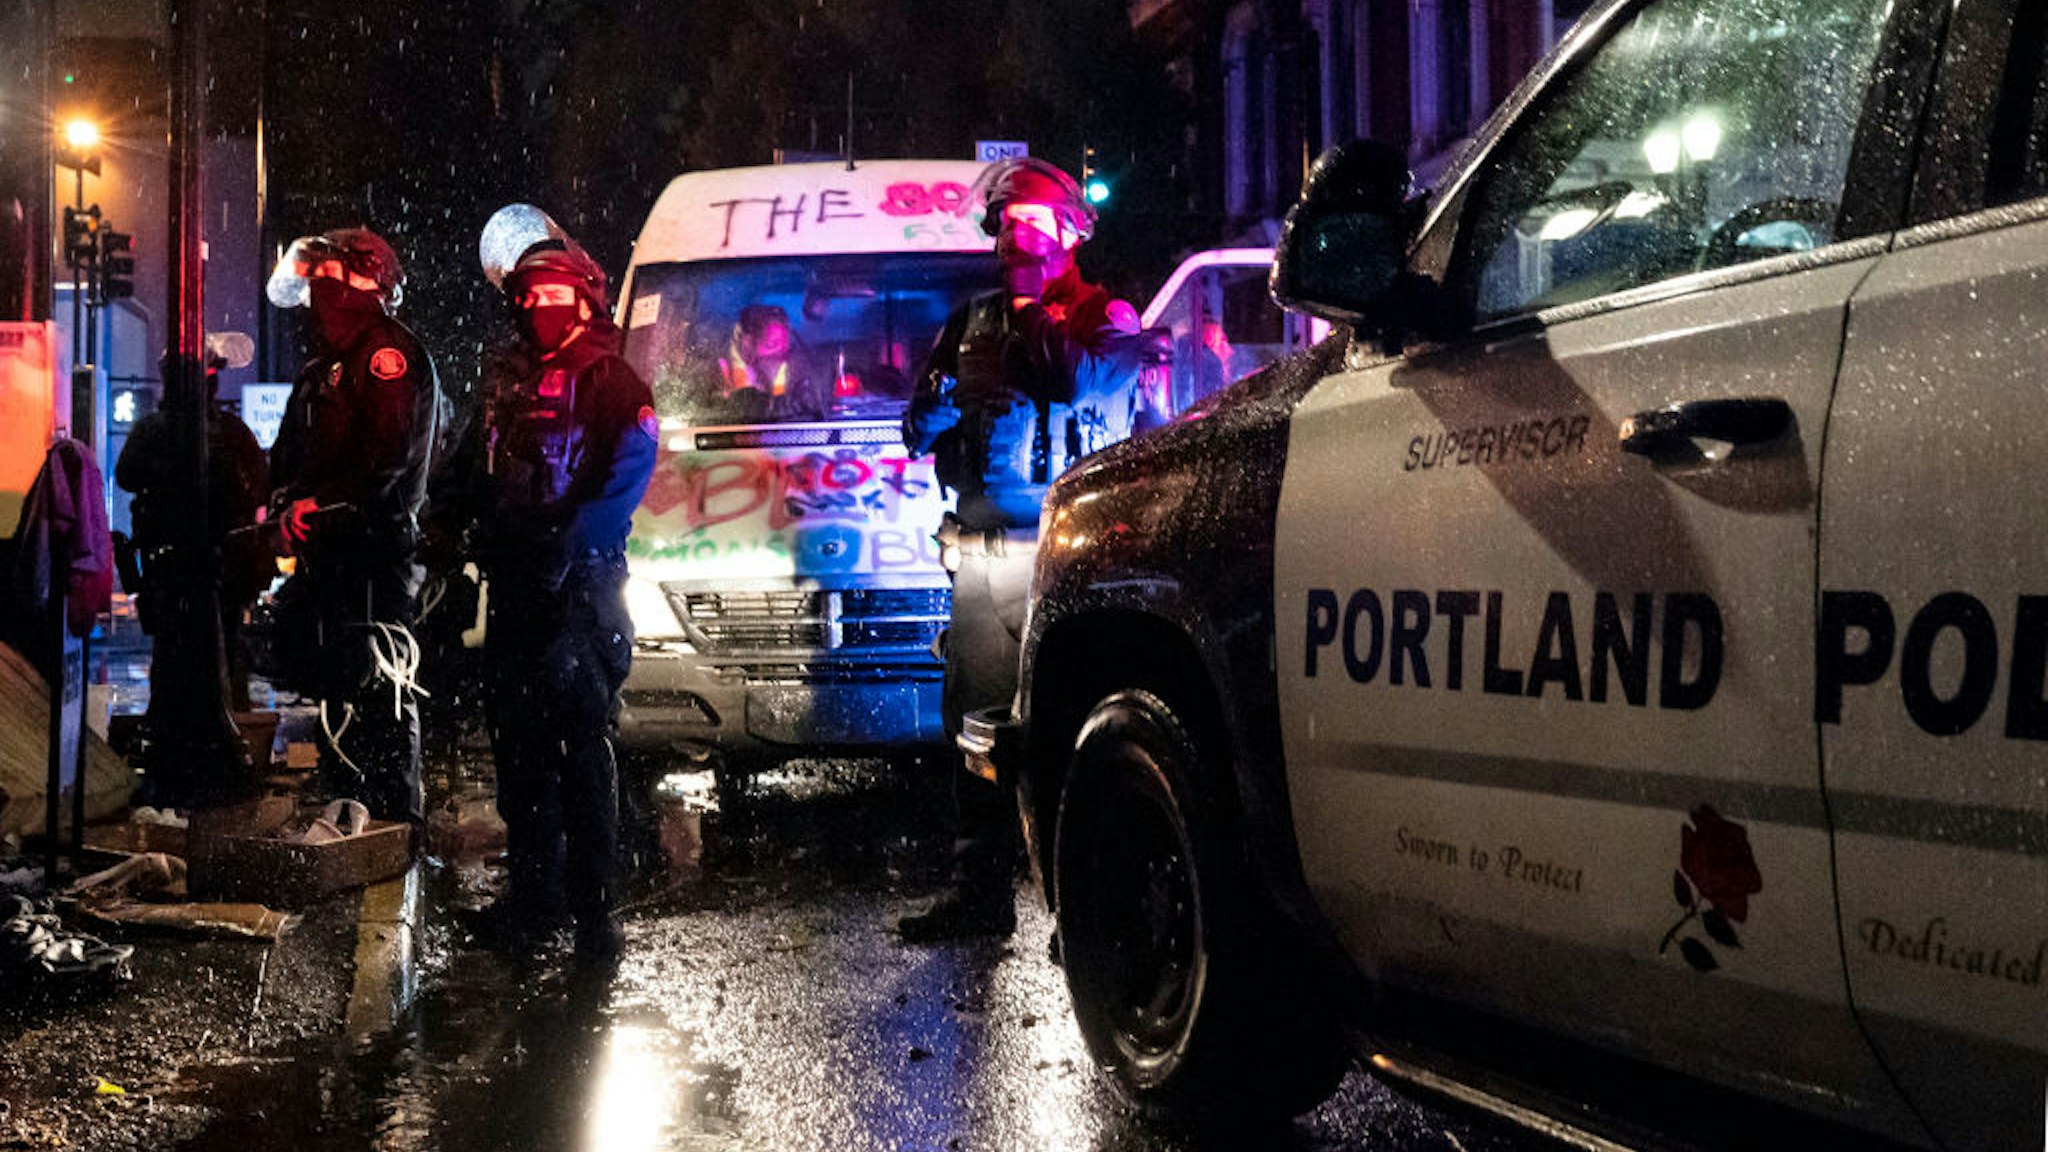 PORTLAND, OR - OCTOBER 11: Police detain passengers in a mutual aid van during an Indigenous Peoples Day of Rage protest on October 11, 2020 in Portland, Oregon. Protesters tore down statues of two U.S. presidents and broke windows out of downtown businesses Sunday night before police intervened. (Photo by Nathan Howard/Getty Images)